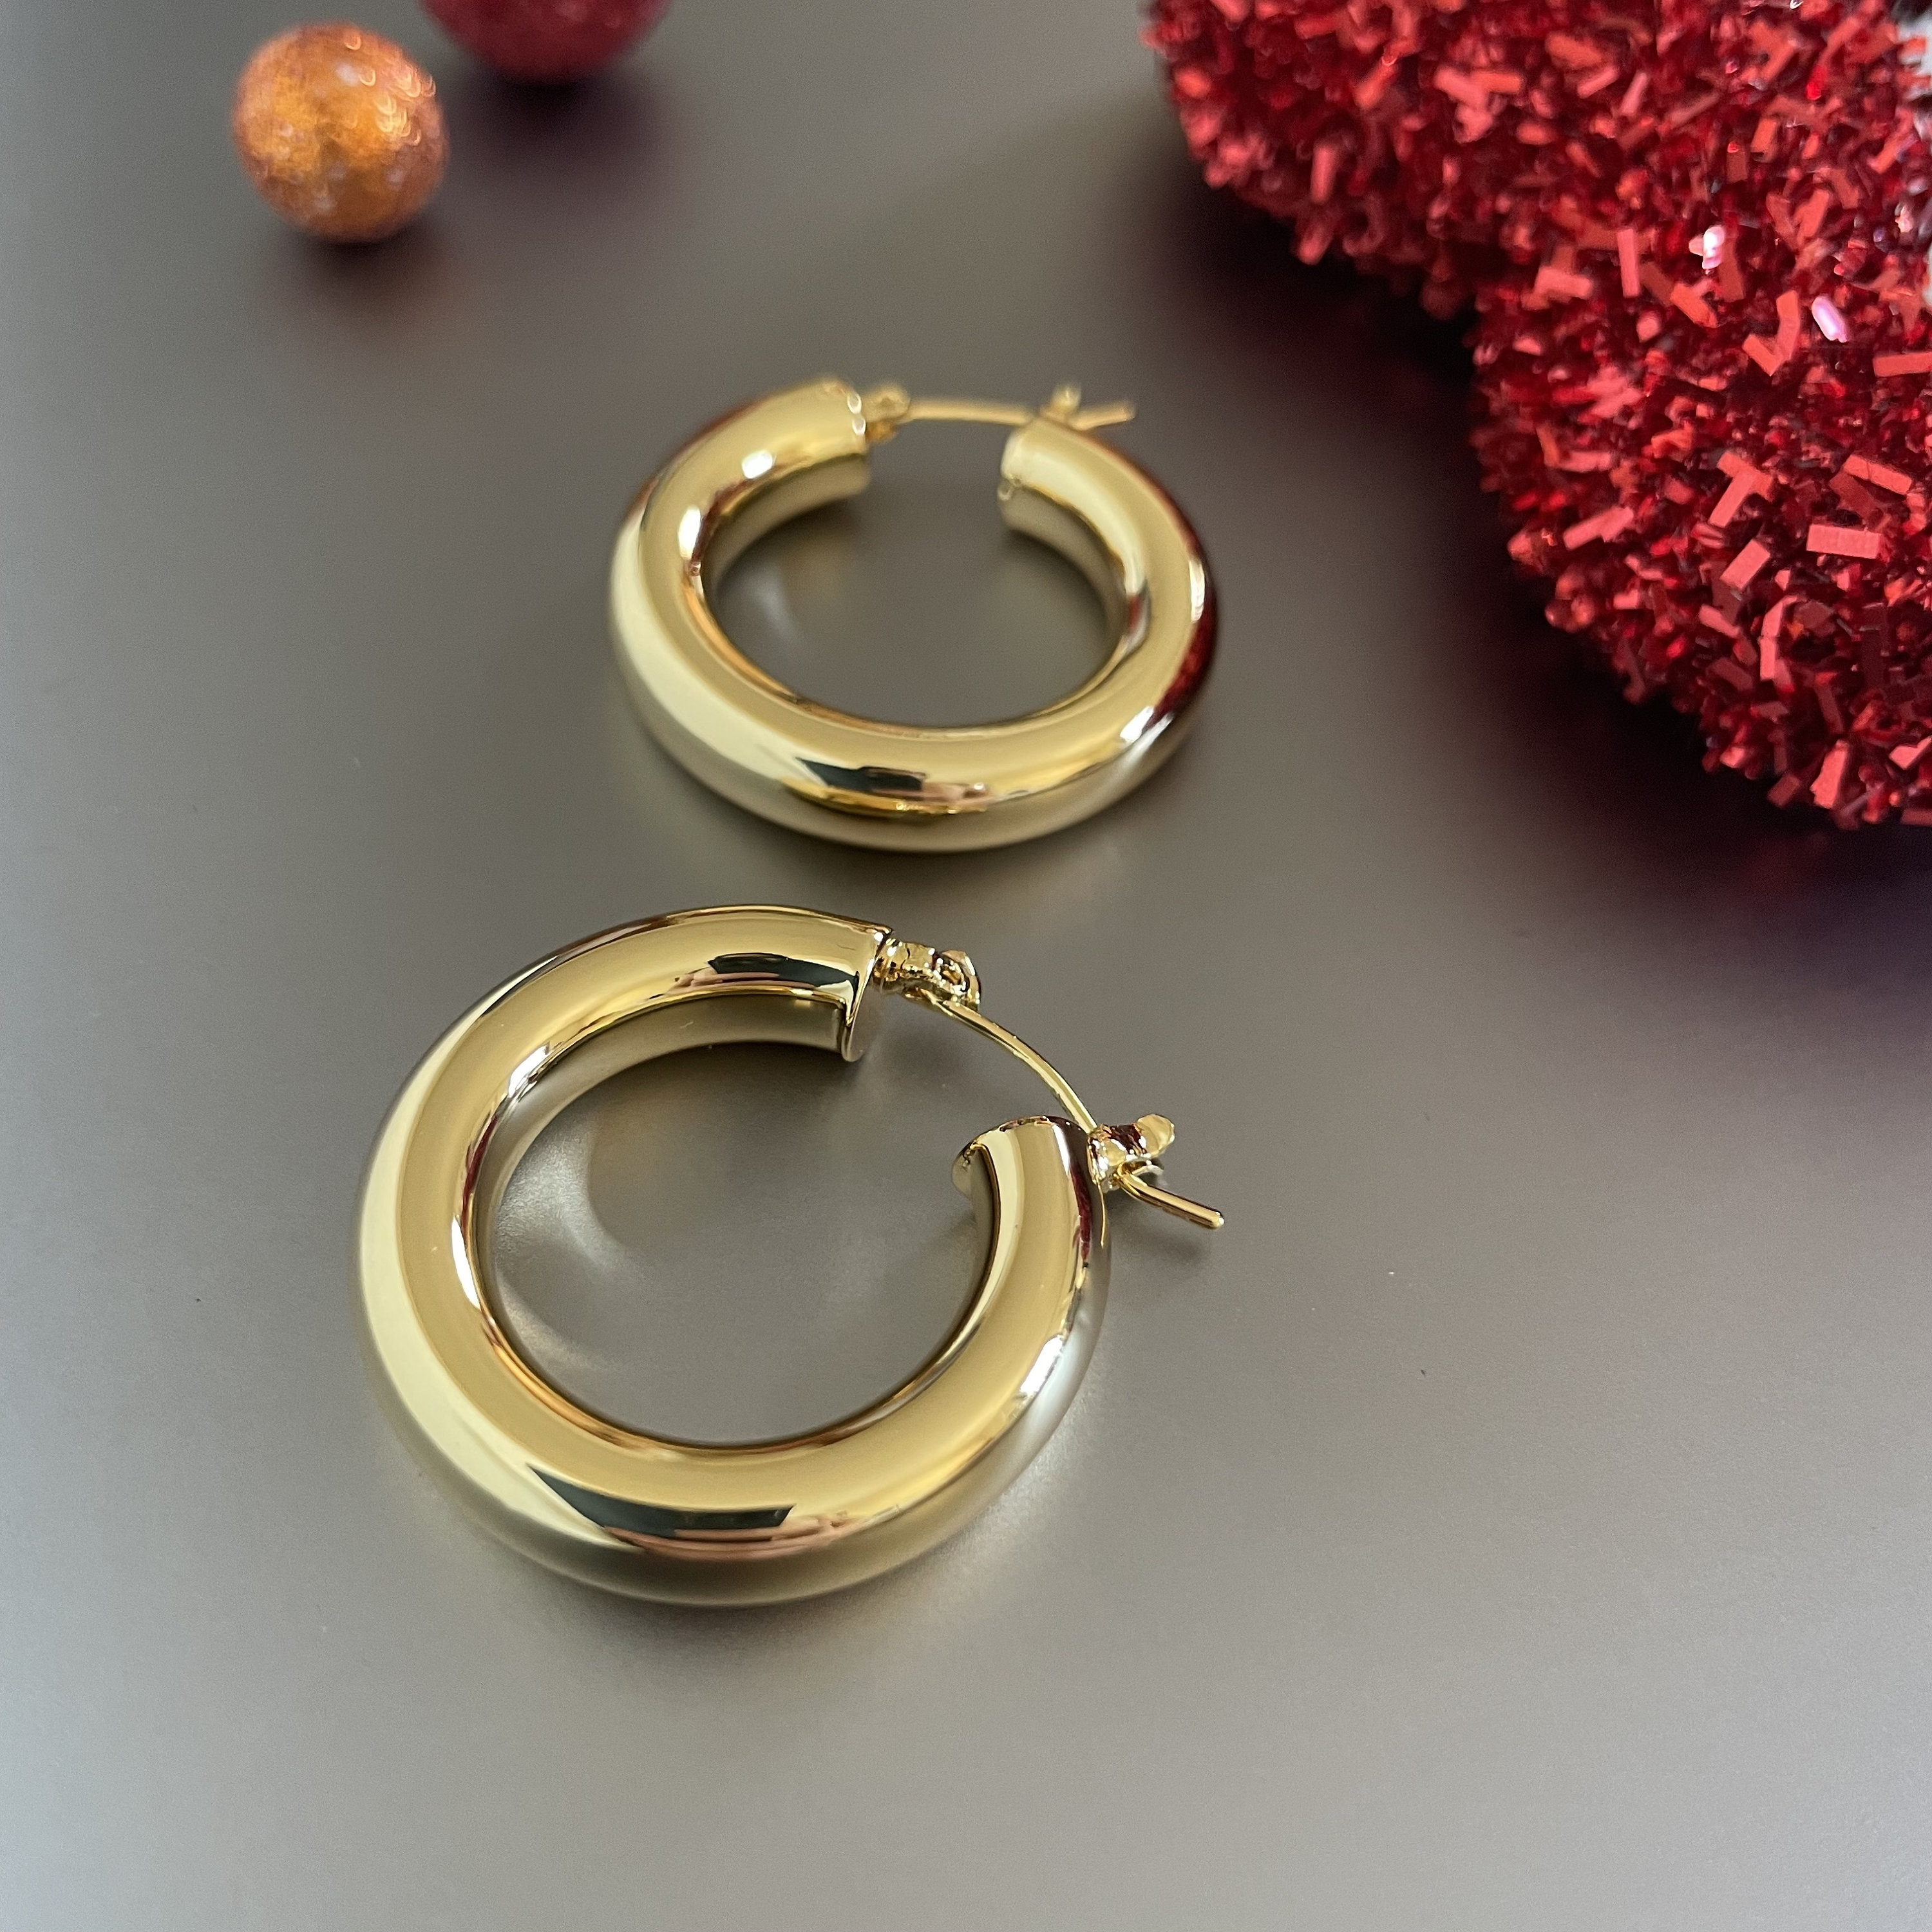 Gold Thick Hoop Earrings Statement Minimalist Earrings Chunky Gold Hoops 14k Gold Filled Hoop Earrings Bold Rectangular Oval Hoops